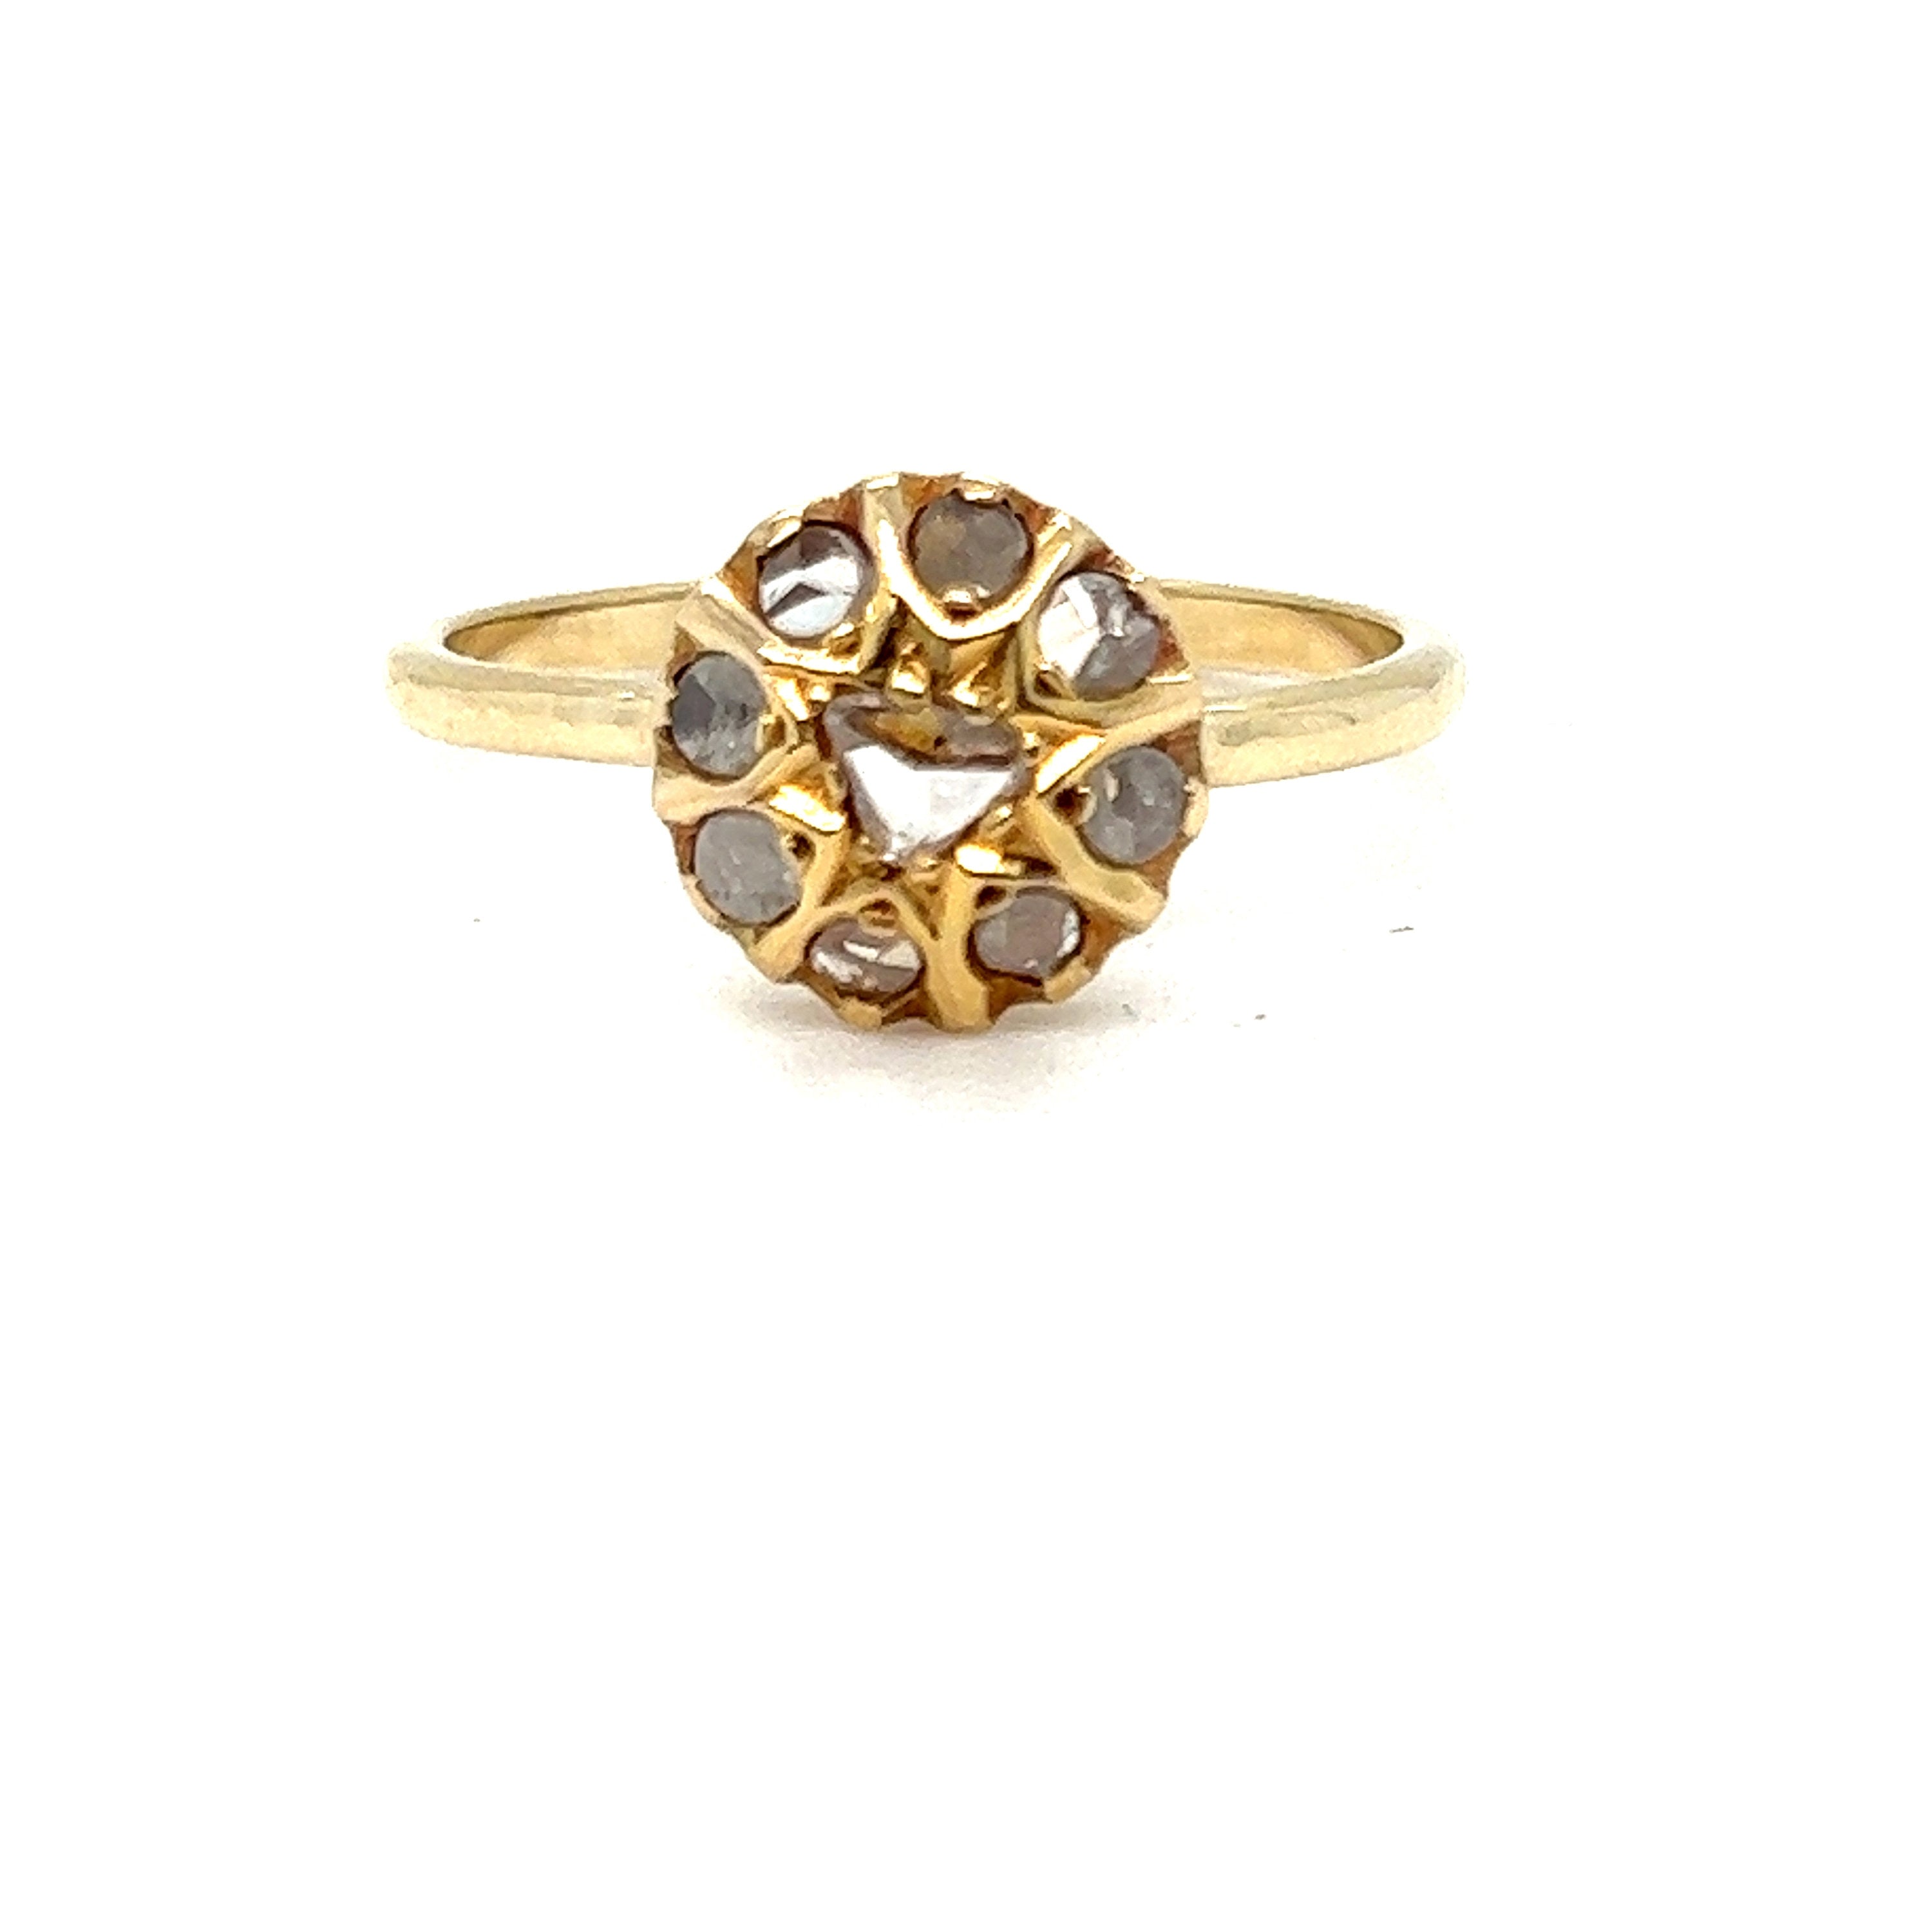 Antique 14K Yellow Gold Rose Cut Diamond Cluster Engagement Ring.